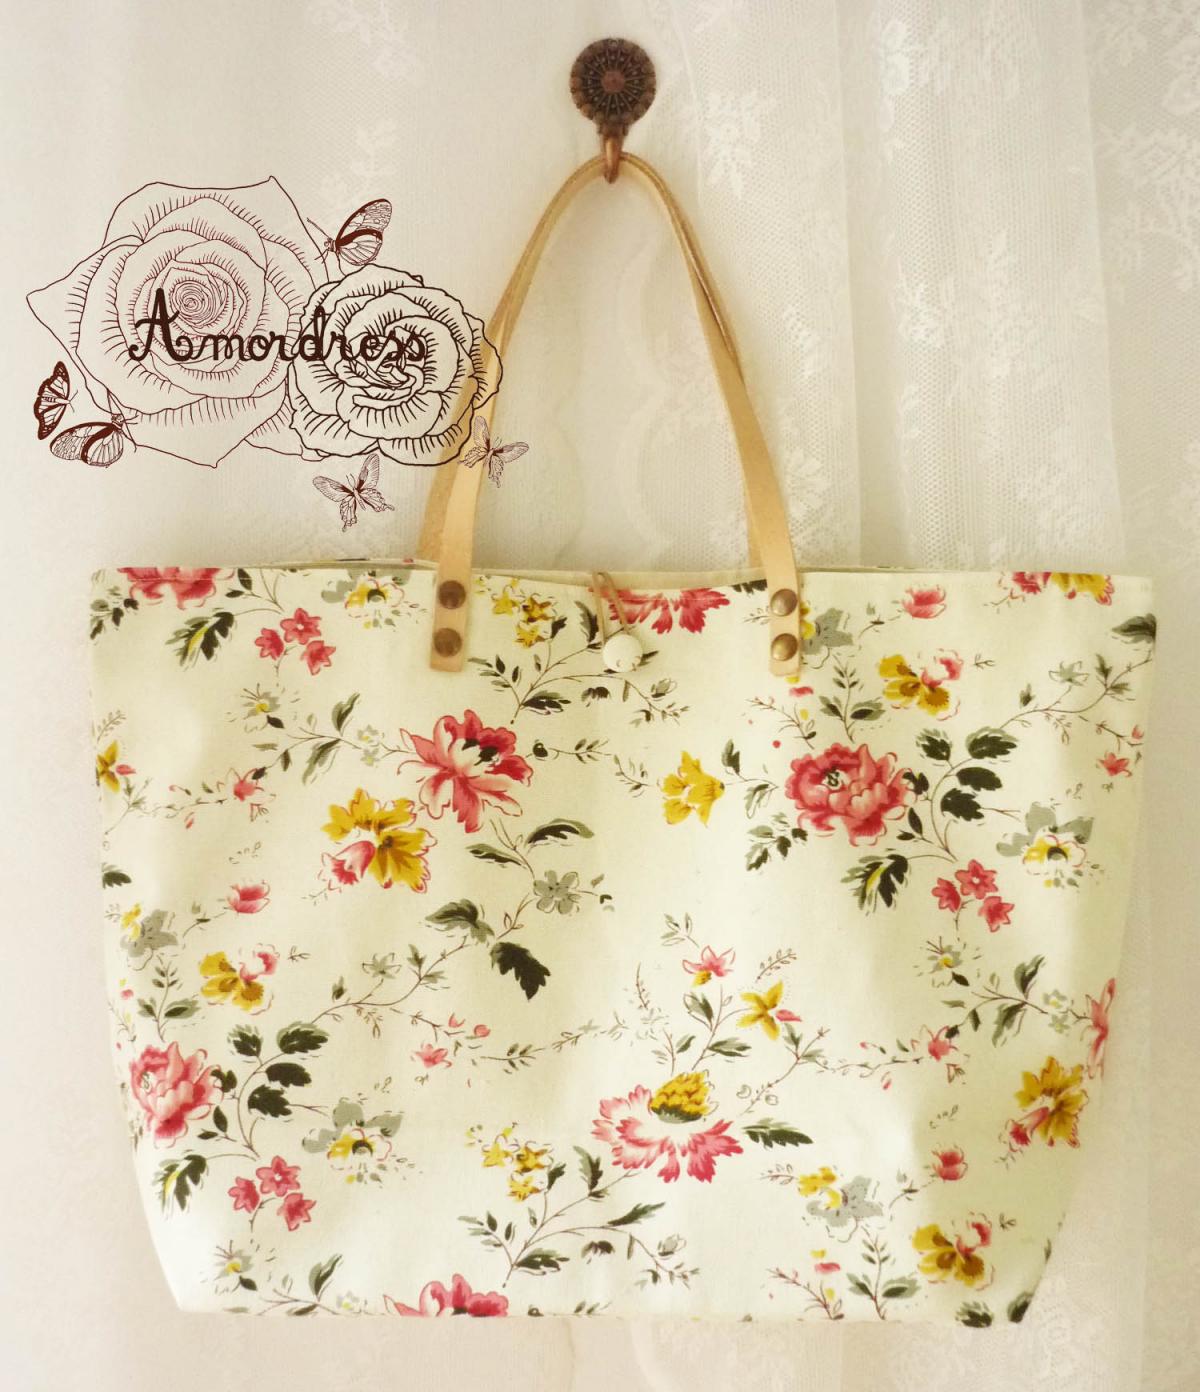 Floral Tote Bag Printed Canvas Bag Genuine Leather Strap Light Khaki With Spring Floral Shabby Chic Bag ...amor The Inspired Collection...